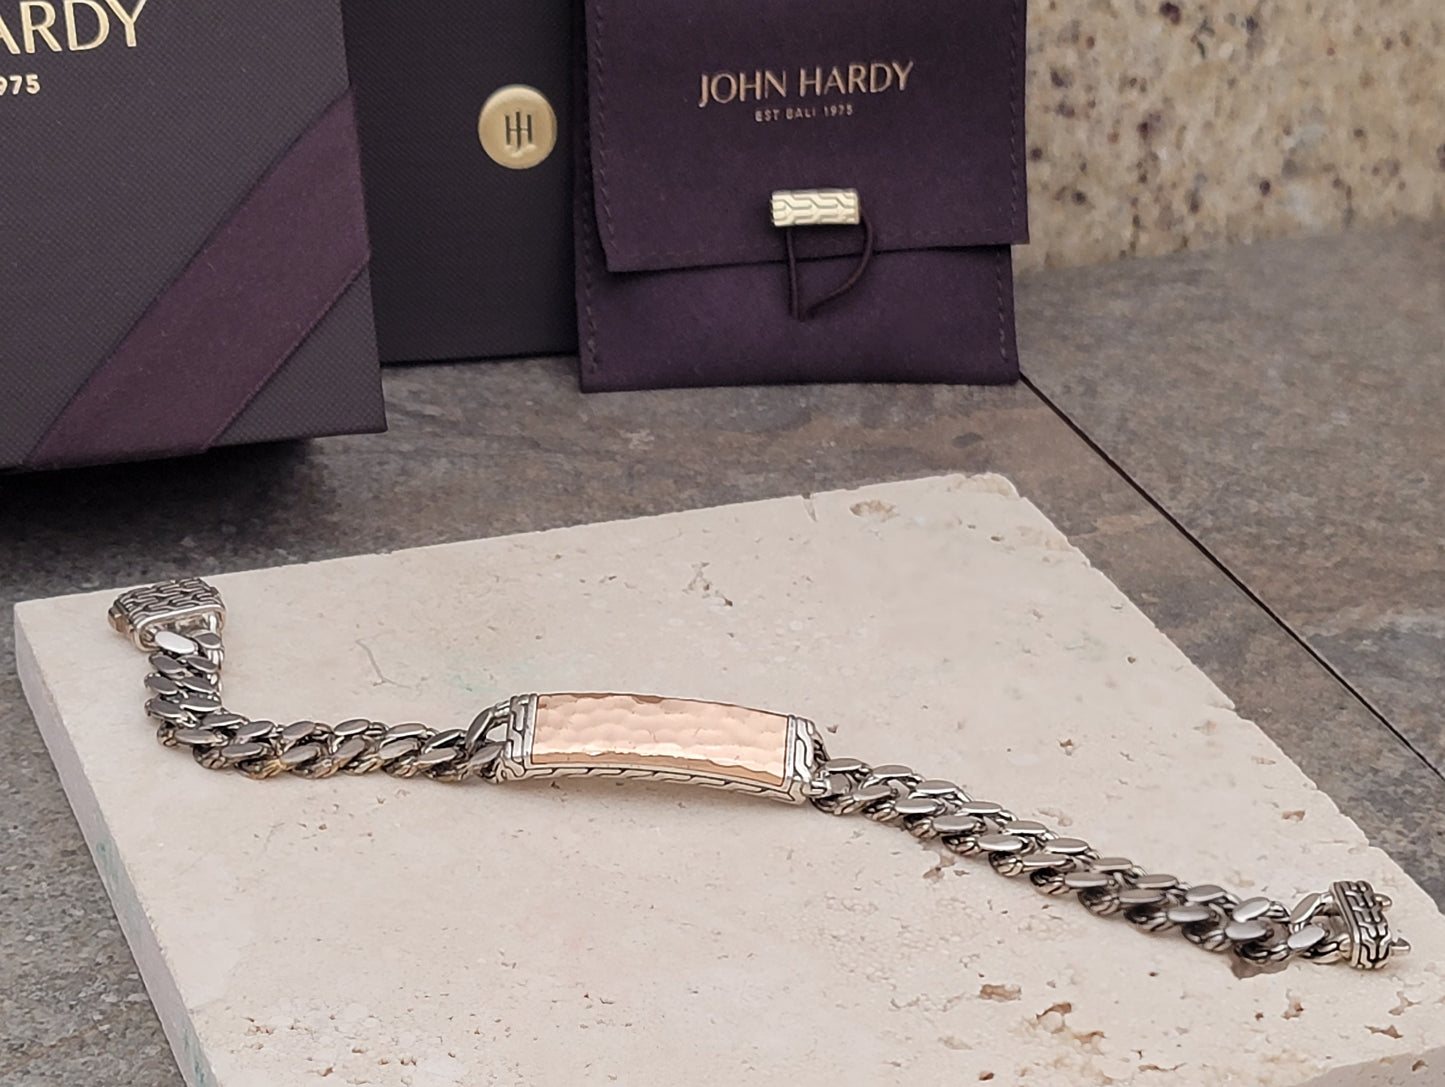 John Hardy Men's Hammered Bronze and 925 Silver Links Bracelet - New with Box